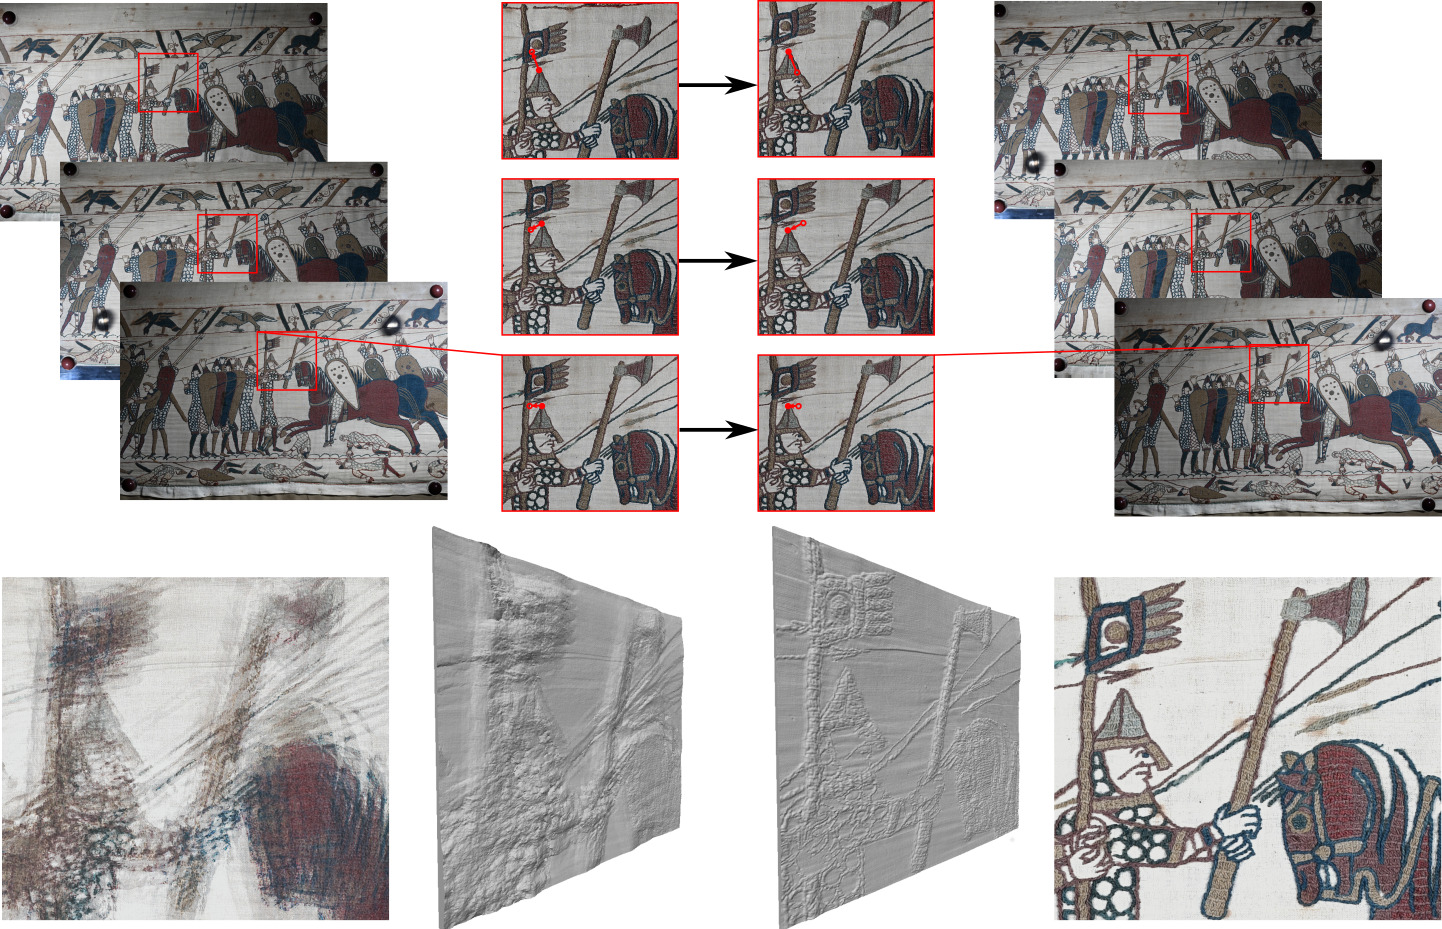 Alignment of photometric stereo images improves the 3D reconstruction